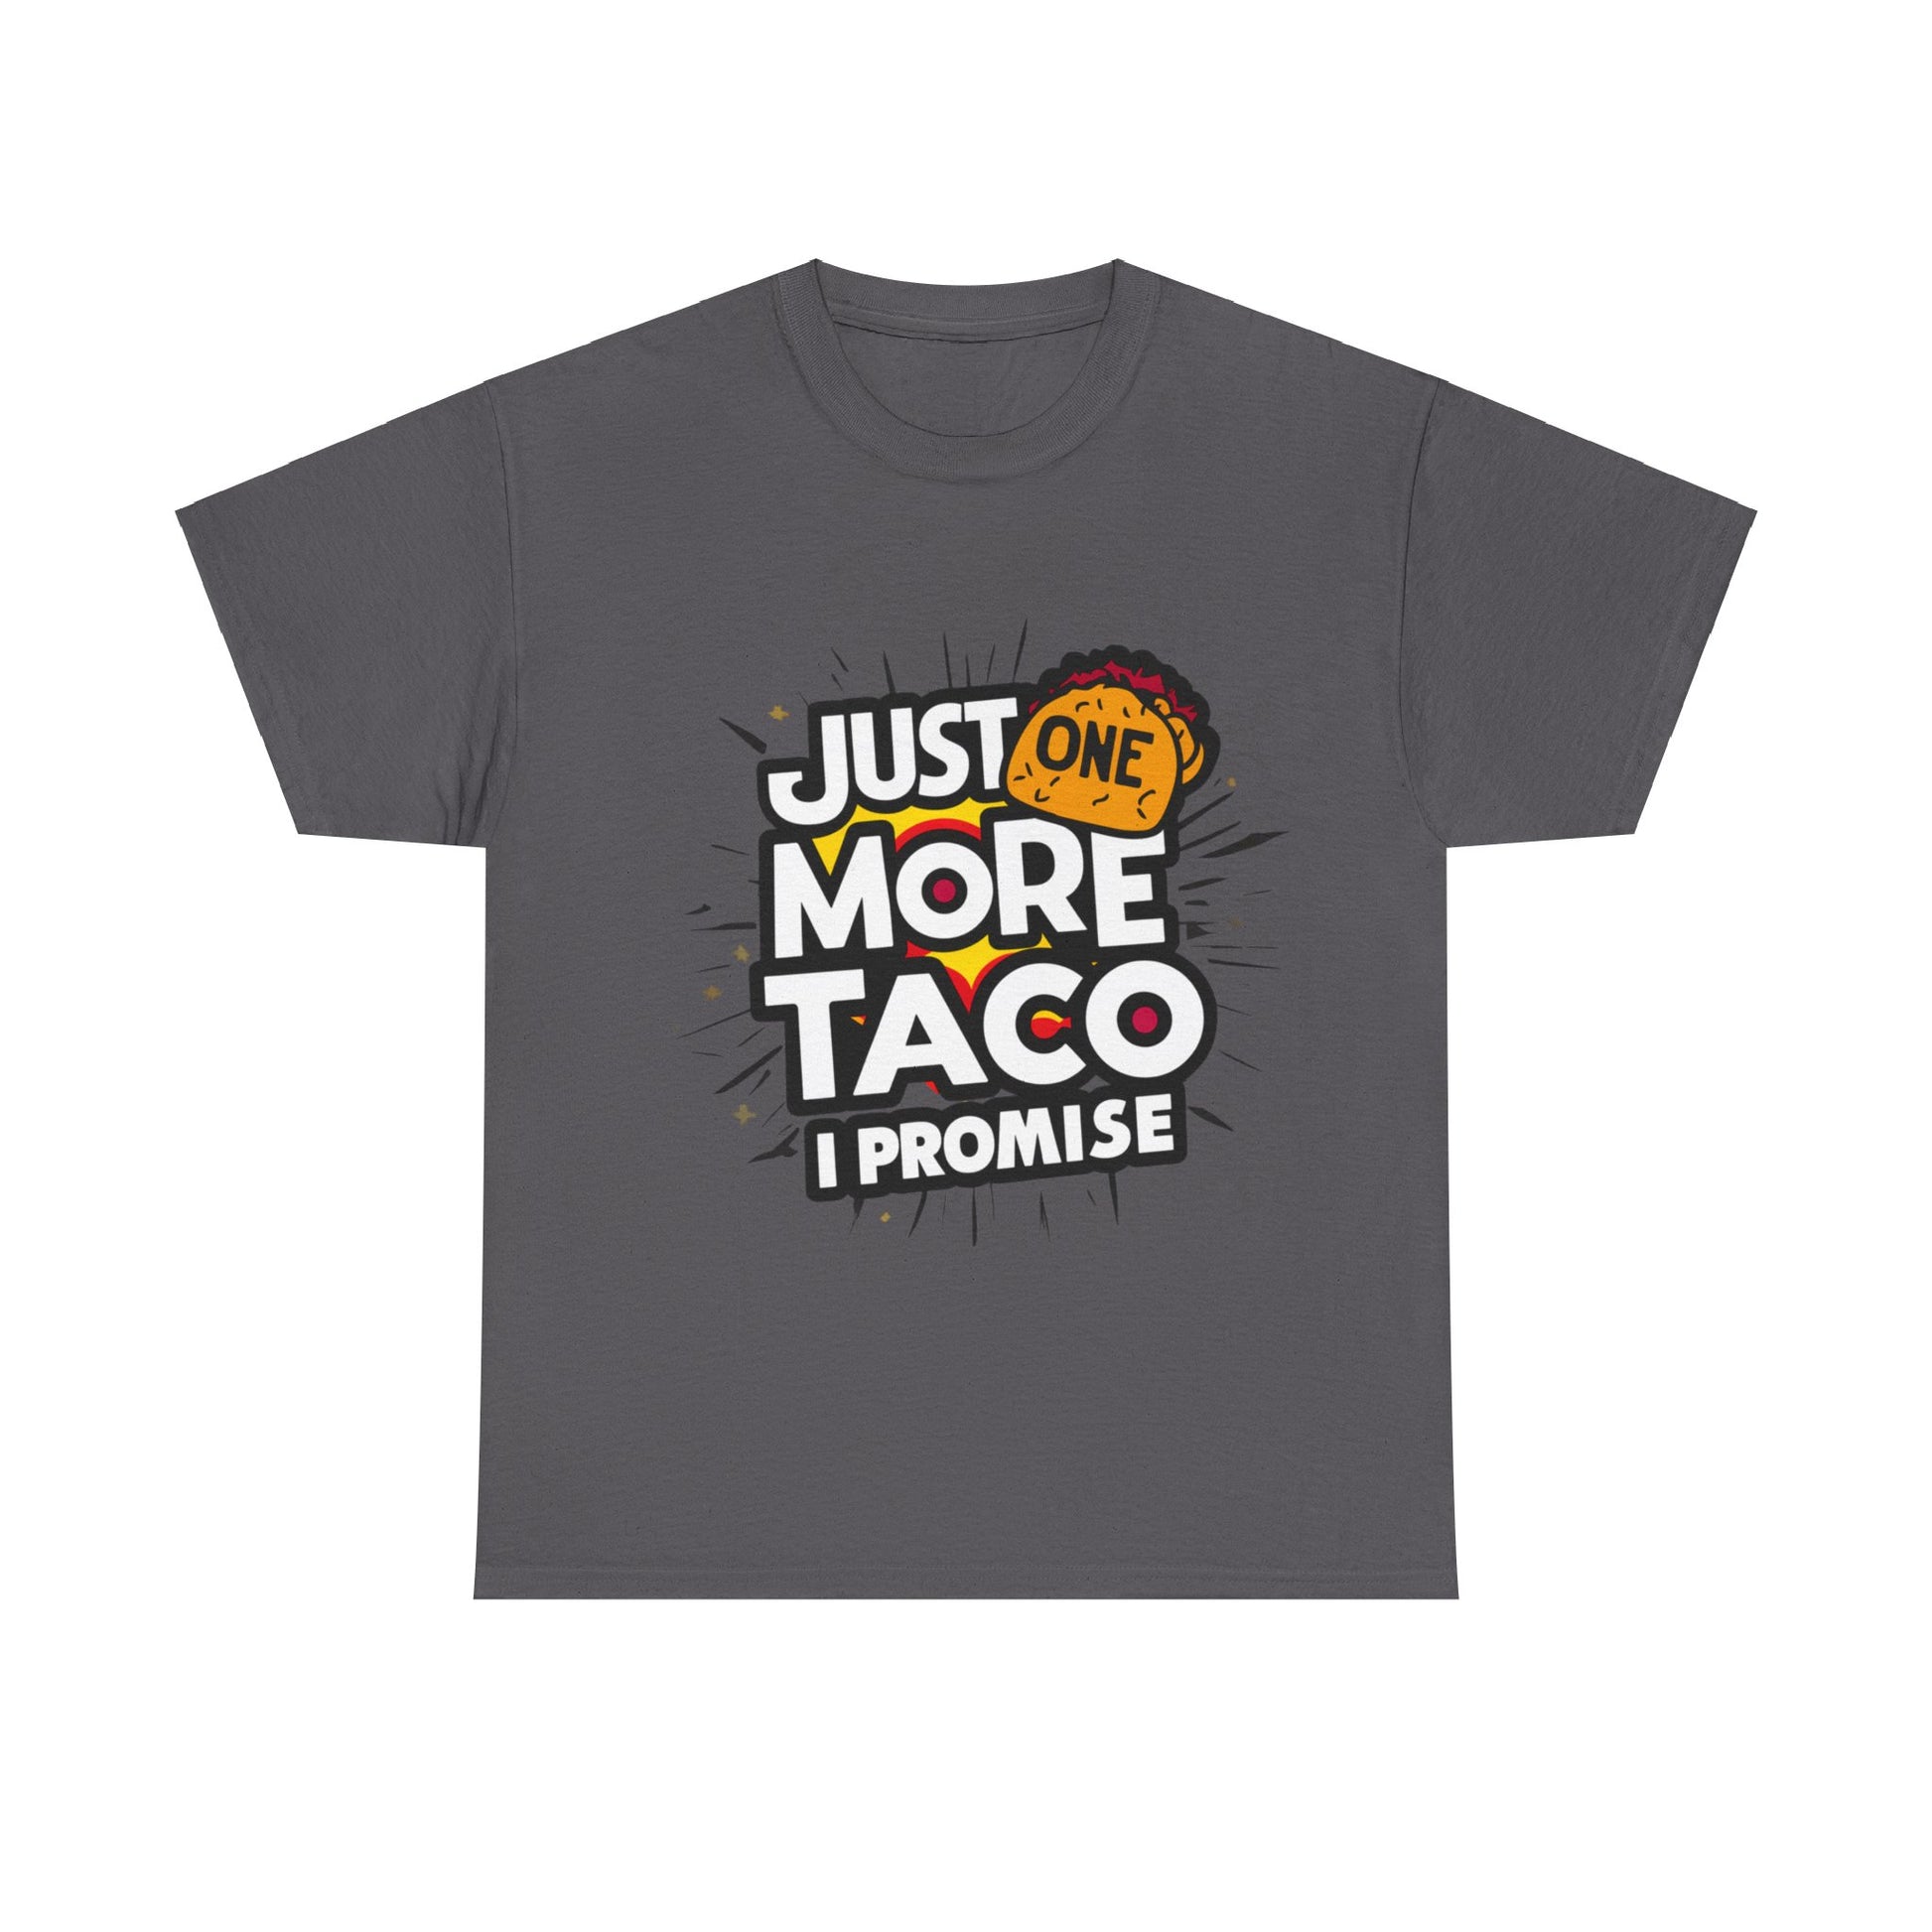 Copy of Just One More Taco I Promise Mexican Food Graphic Unisex Heavy Cotton Tee Cotton Funny Humorous Graphic Soft Premium Unisex Men Women Charcoal T-shirt Birthday Gift-2